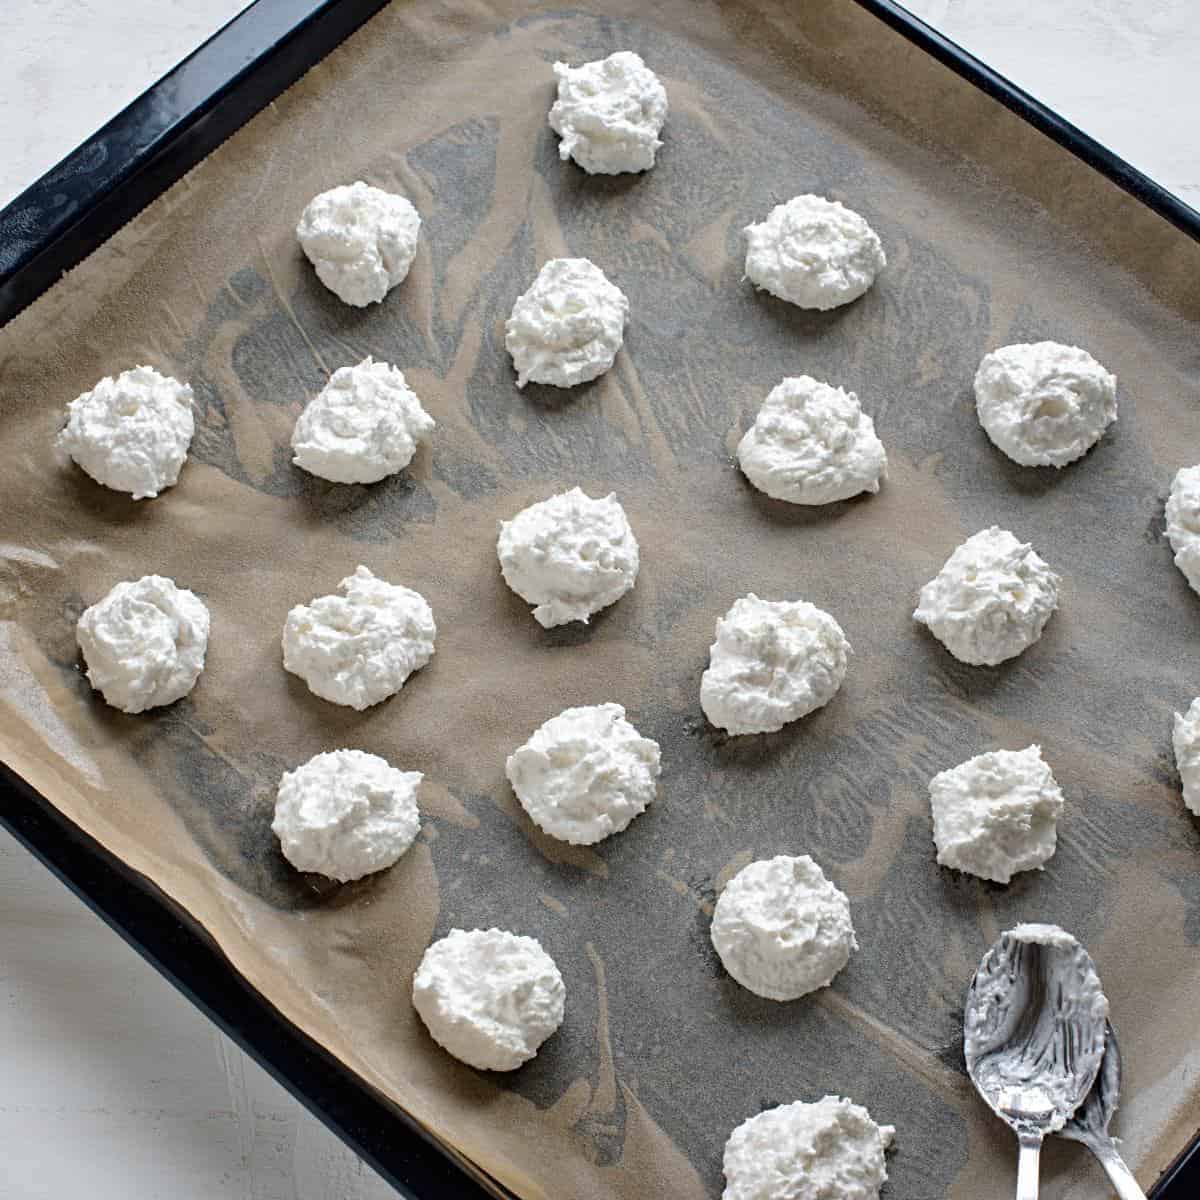 Shaping coconut meringue cookies on a baking sheet.